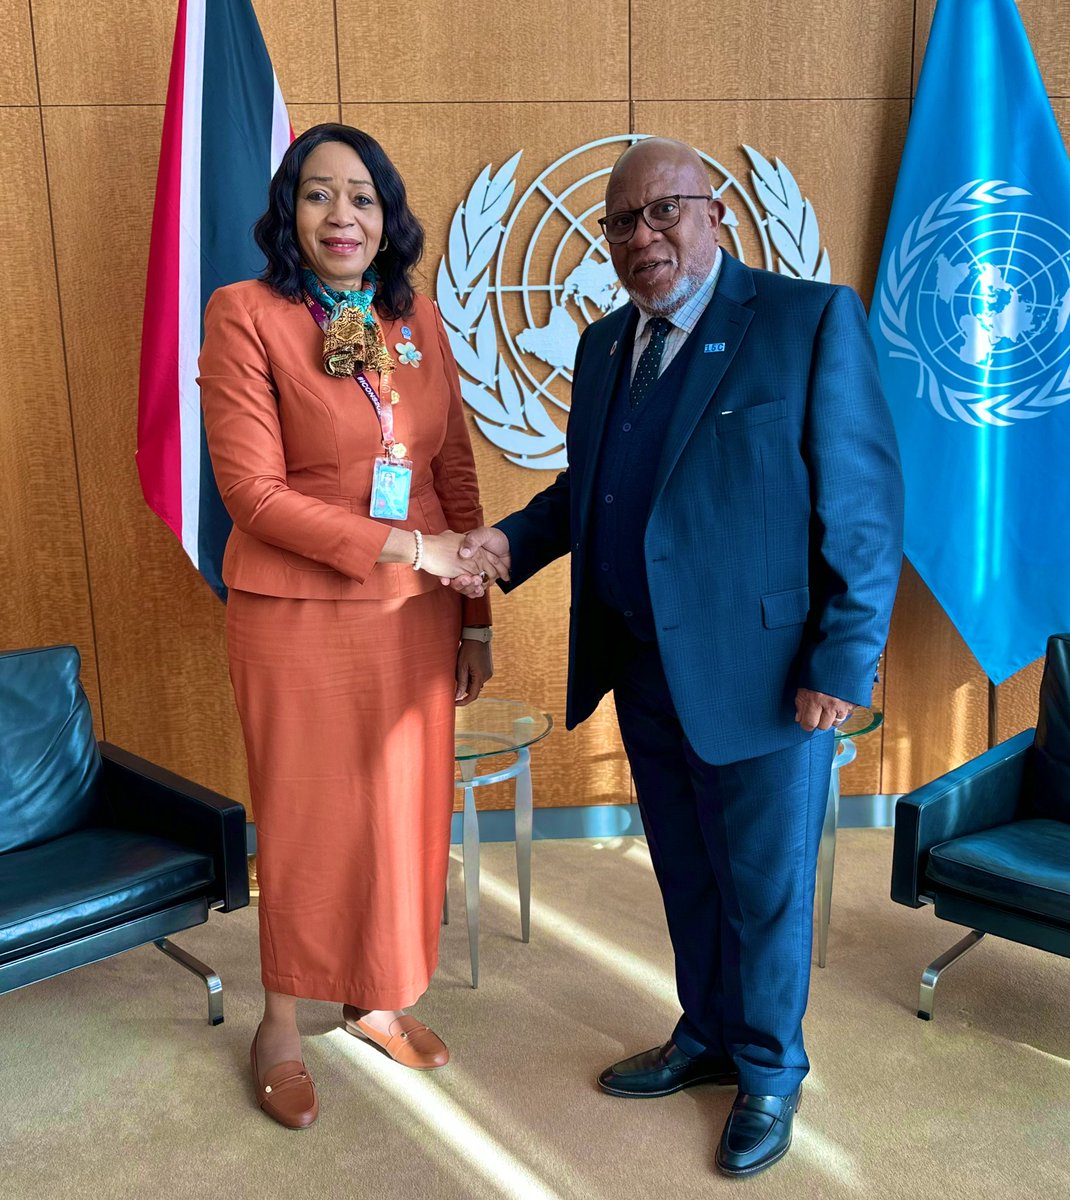 Delighted to meet with @AmbVivianOkeke, Representative of the Director General of @iaeaorg. Commended IAEA’s uniquely important role in international peace and security and appreciated the agency’s role in harnessing the peaceful uses of nuclear energy to support sustainable…